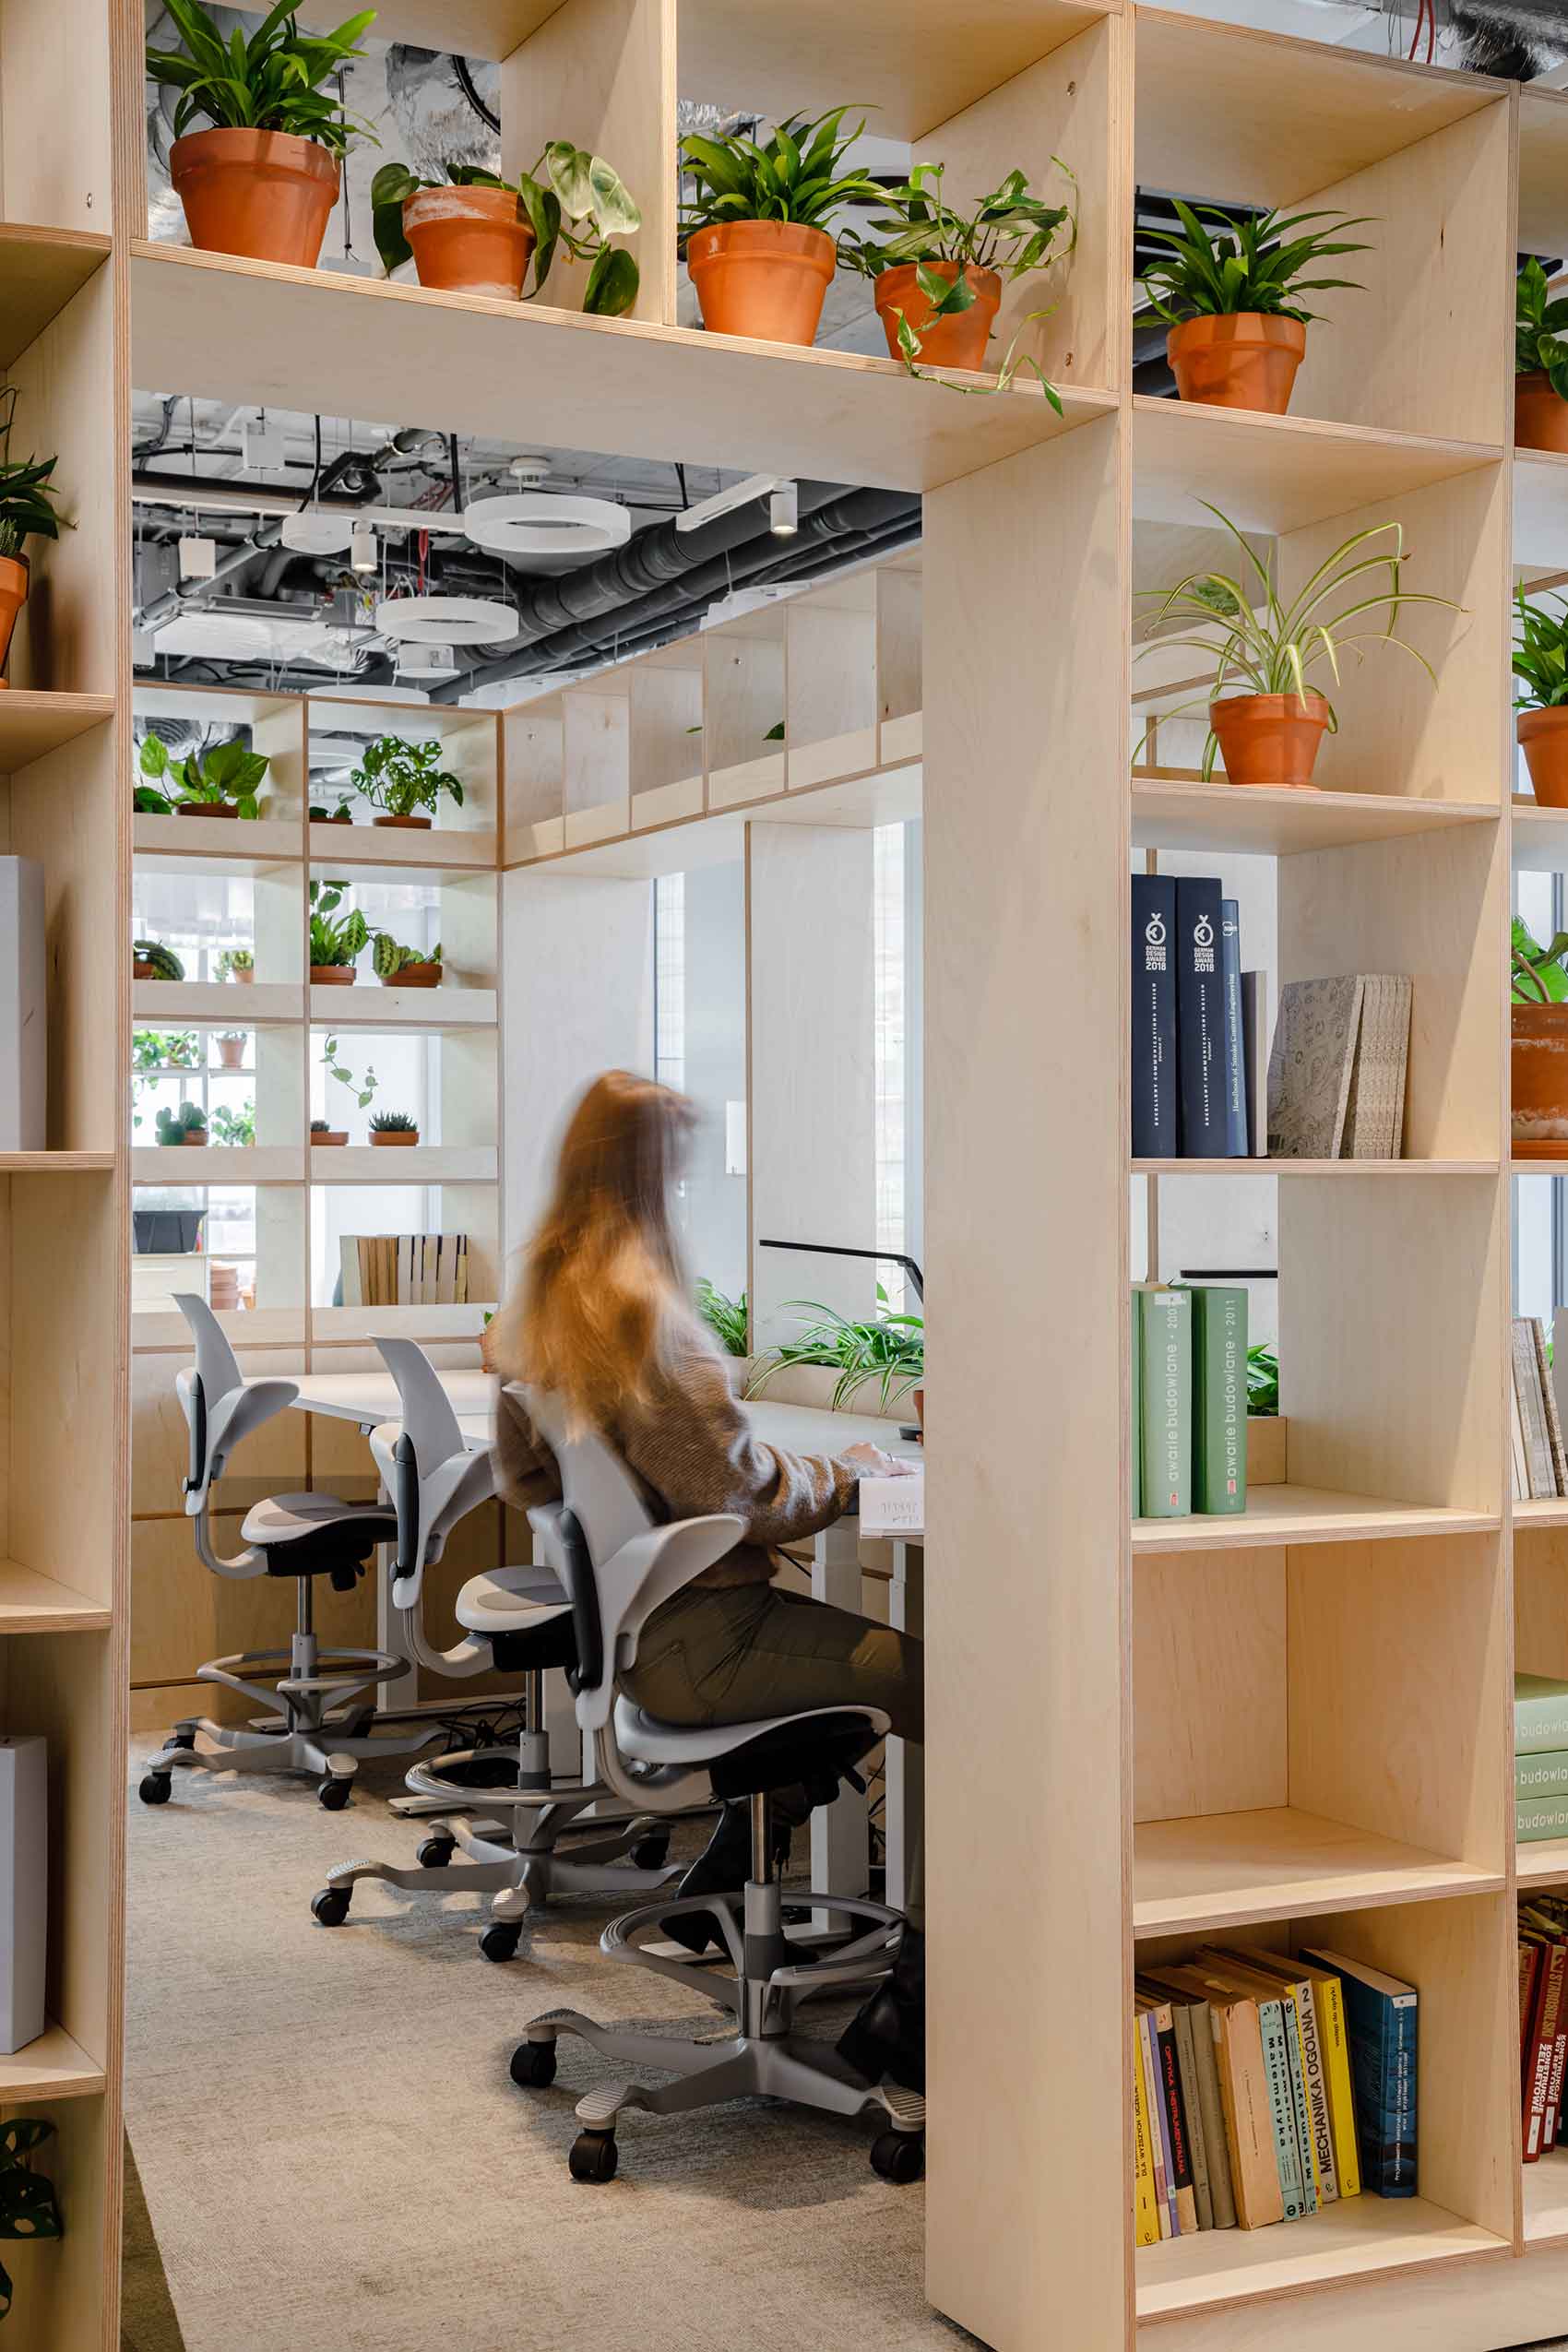 HÅG Capisco Puls seating in an office with wooden shelfing filled with plants